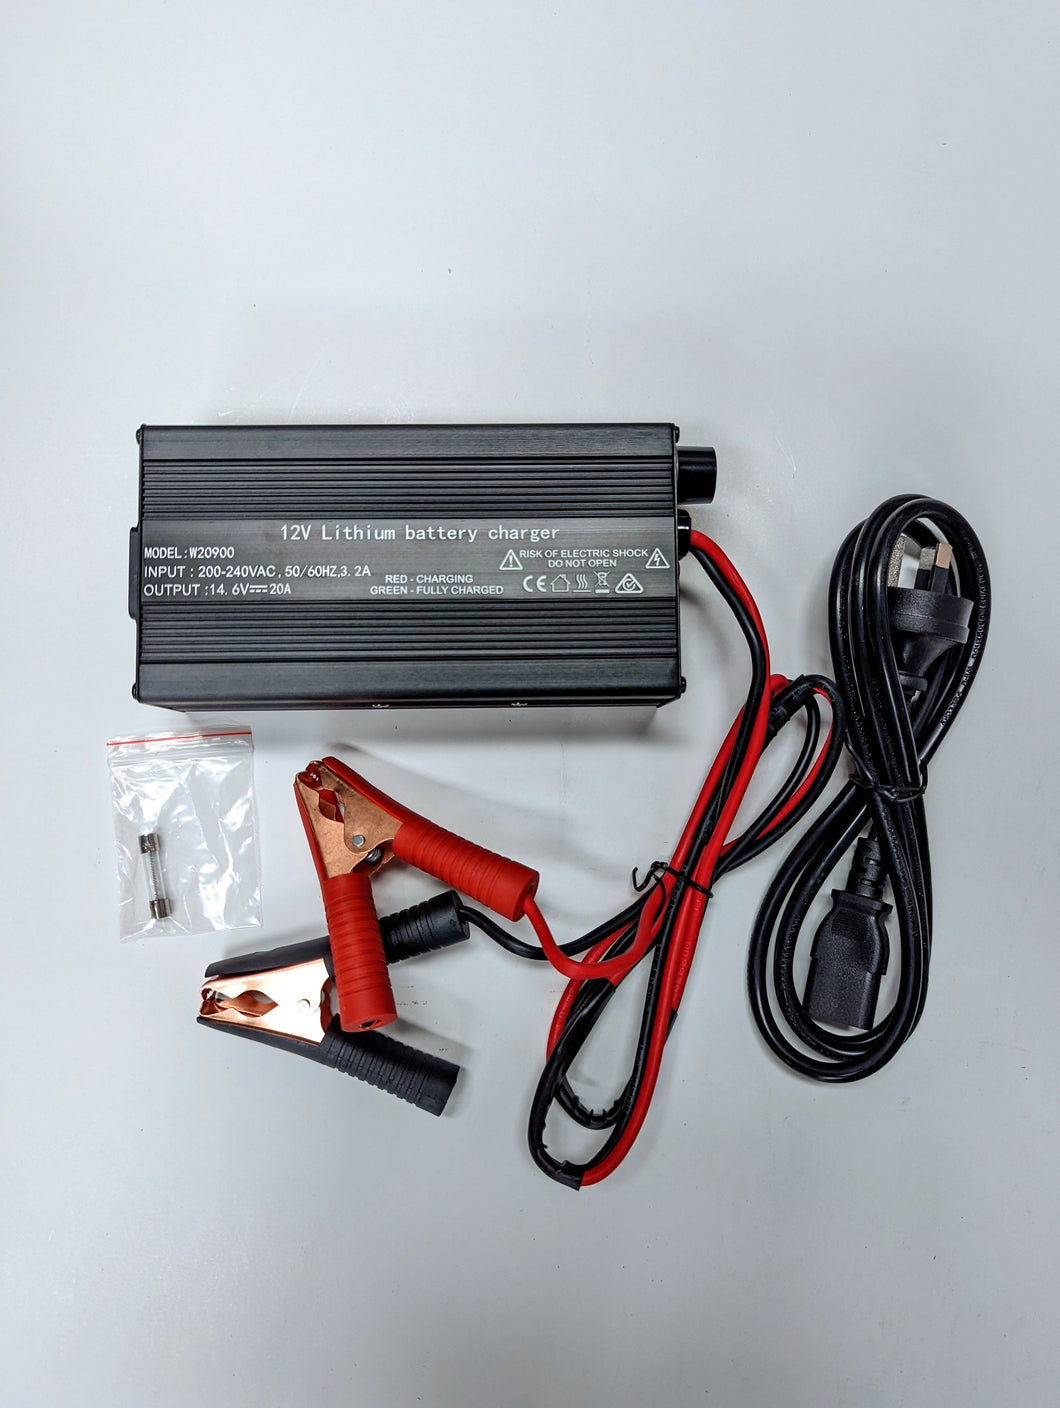  12V Battery Charger, 14.6V 20A Lithium,LiFePO4,Lead